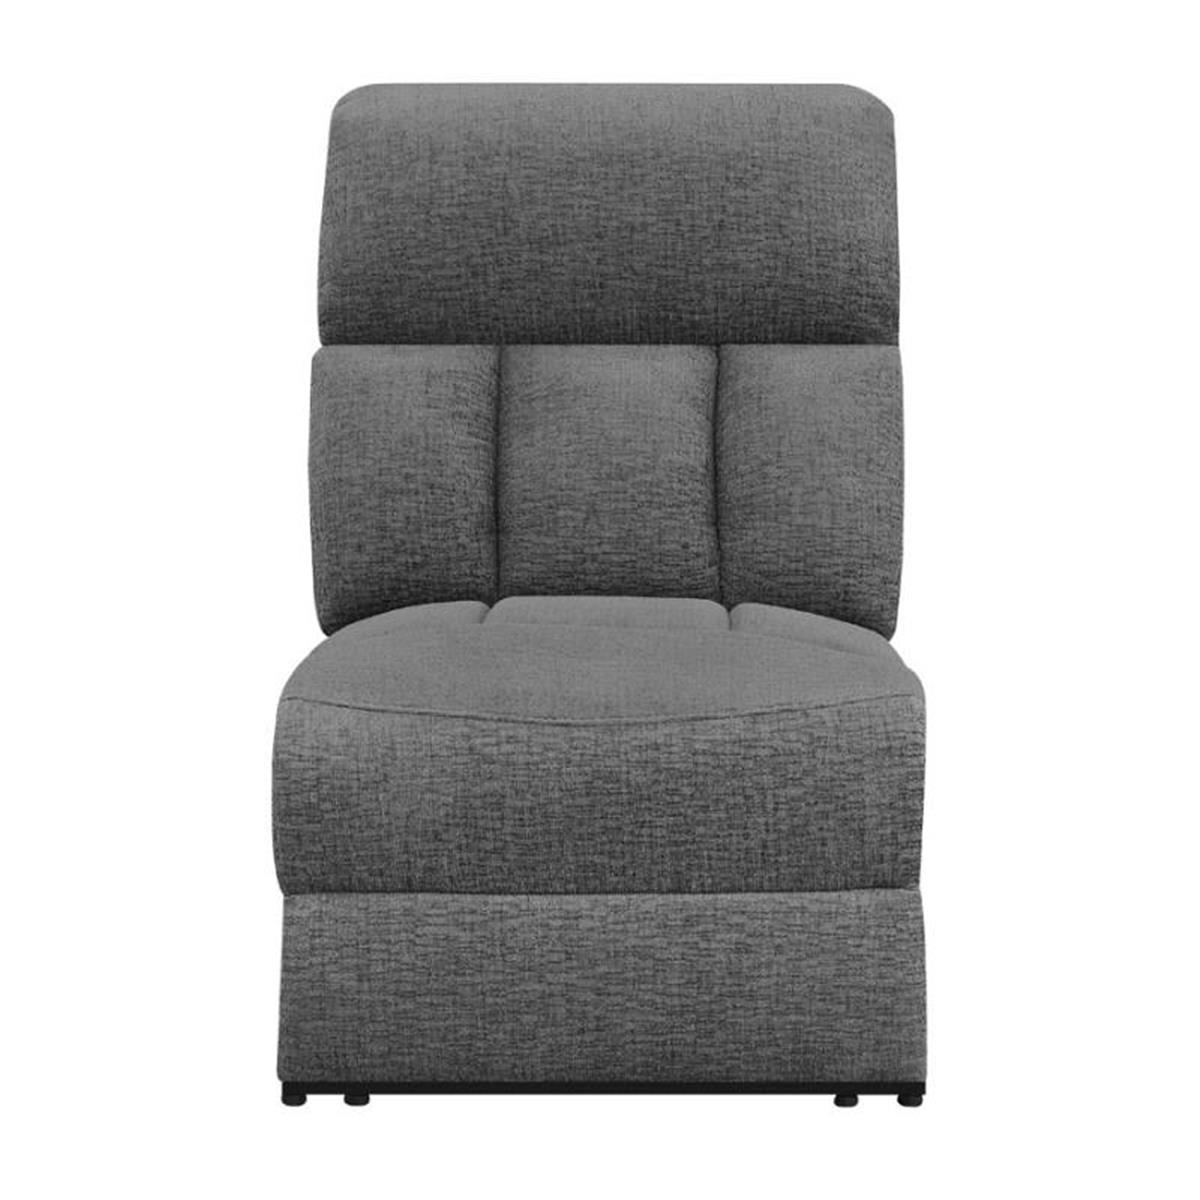 Picture of Coaster Furniture 609540AR 39.75 x 27.25 x 38.25 in. Armless Recliner